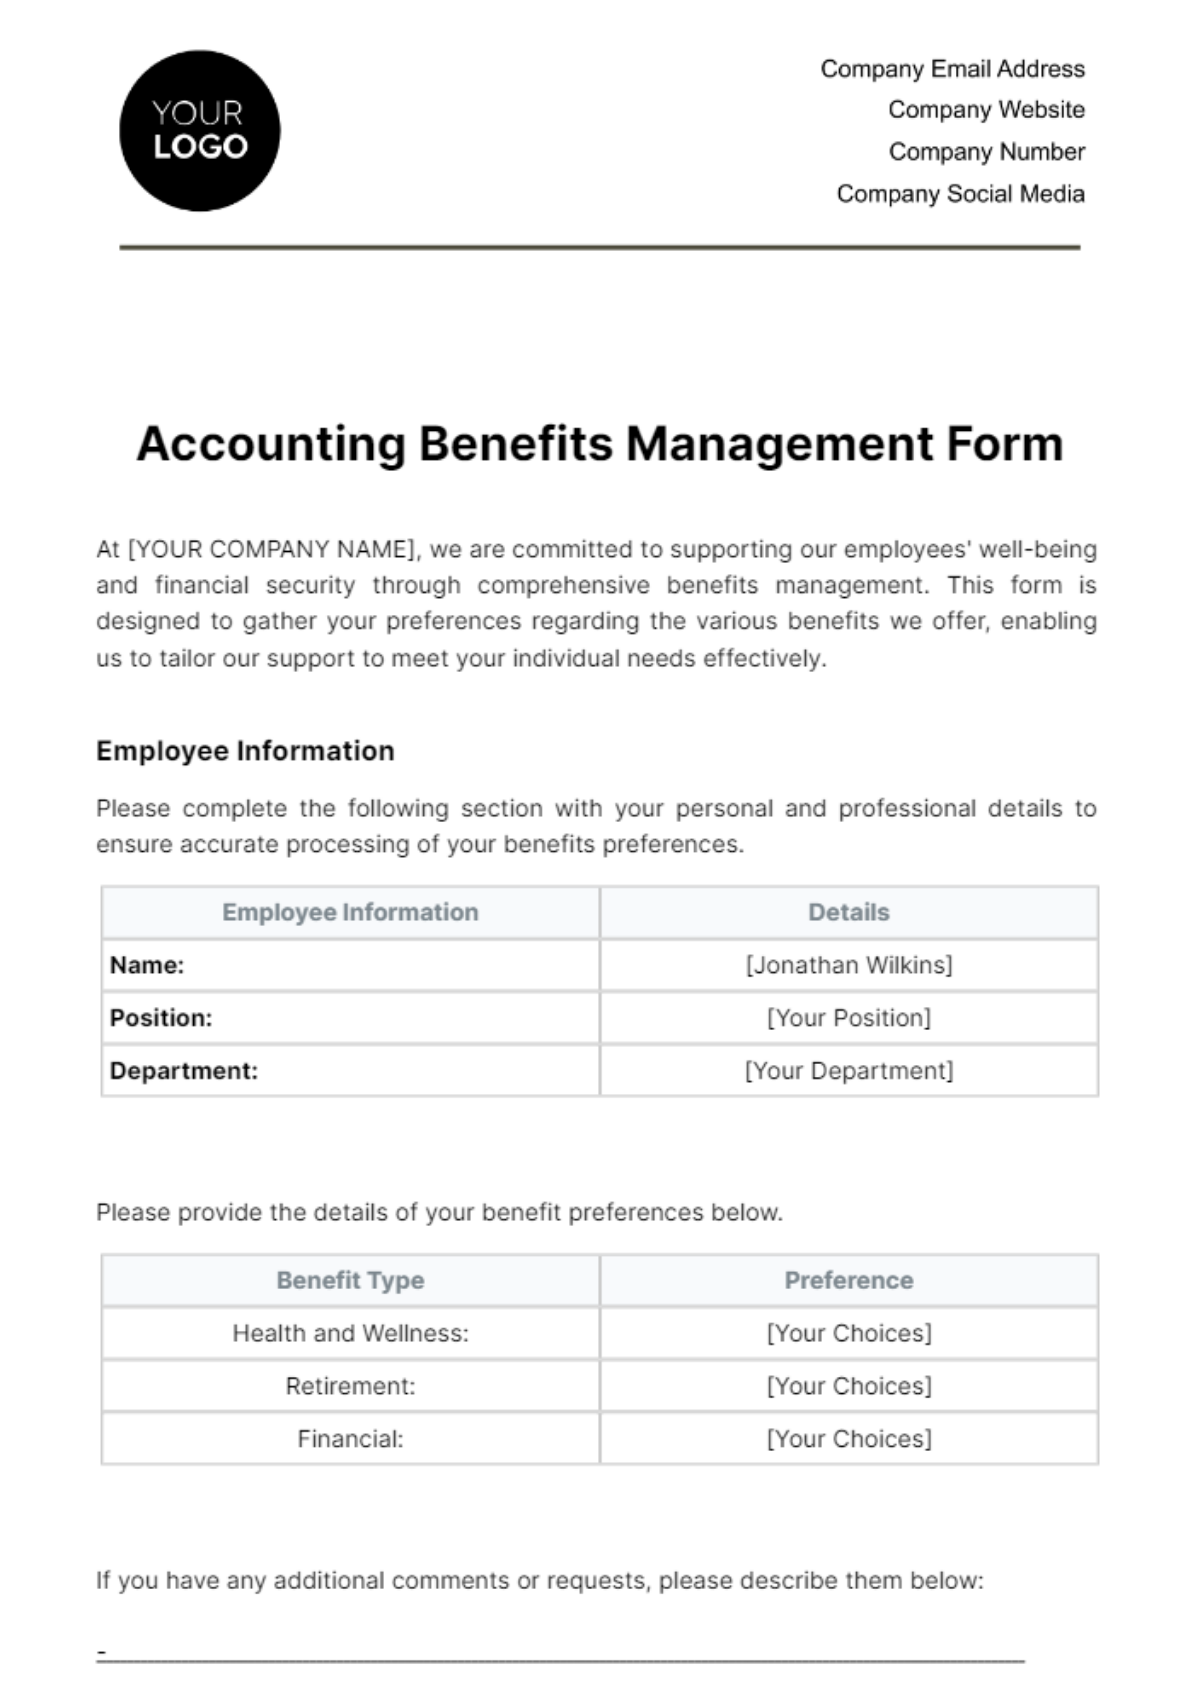 Accounting Benefits Management Form Template